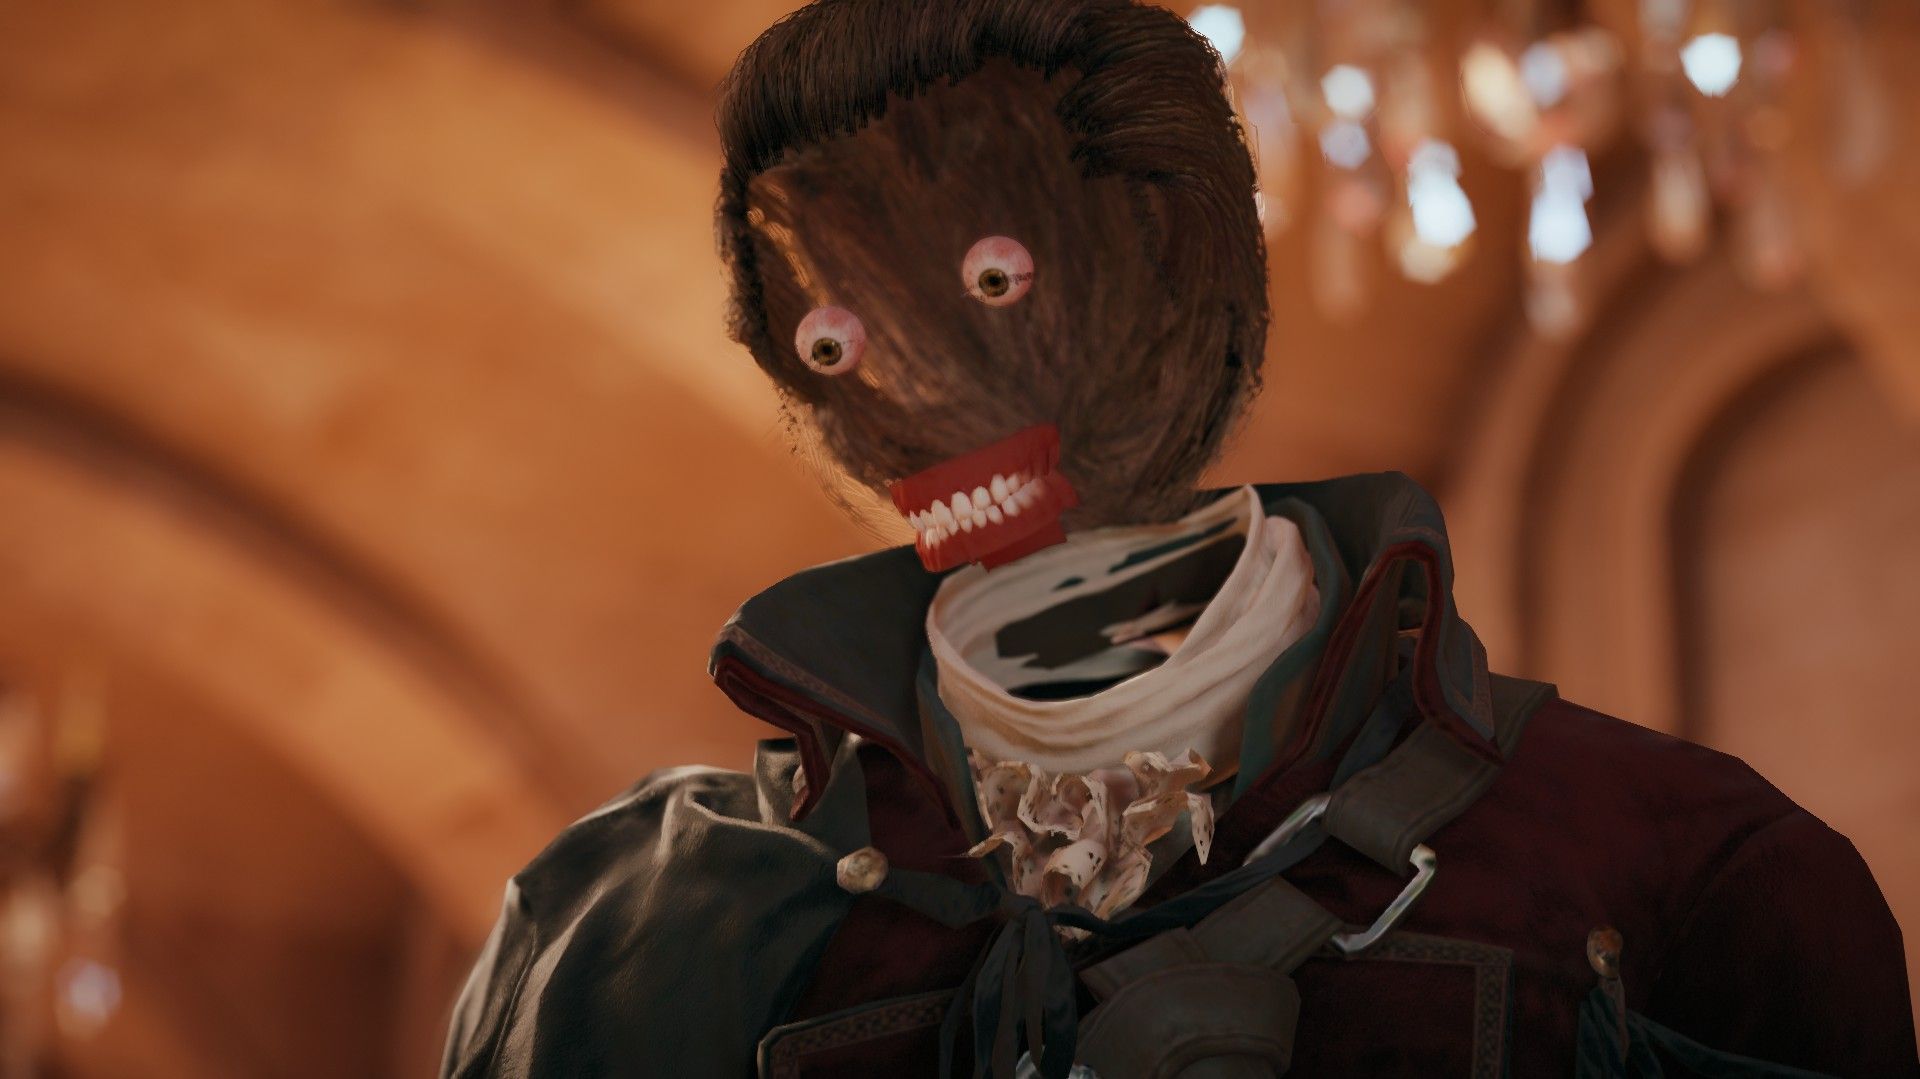 best-bugs-in-games-list-4-assassins-creed-unity-face.jpg